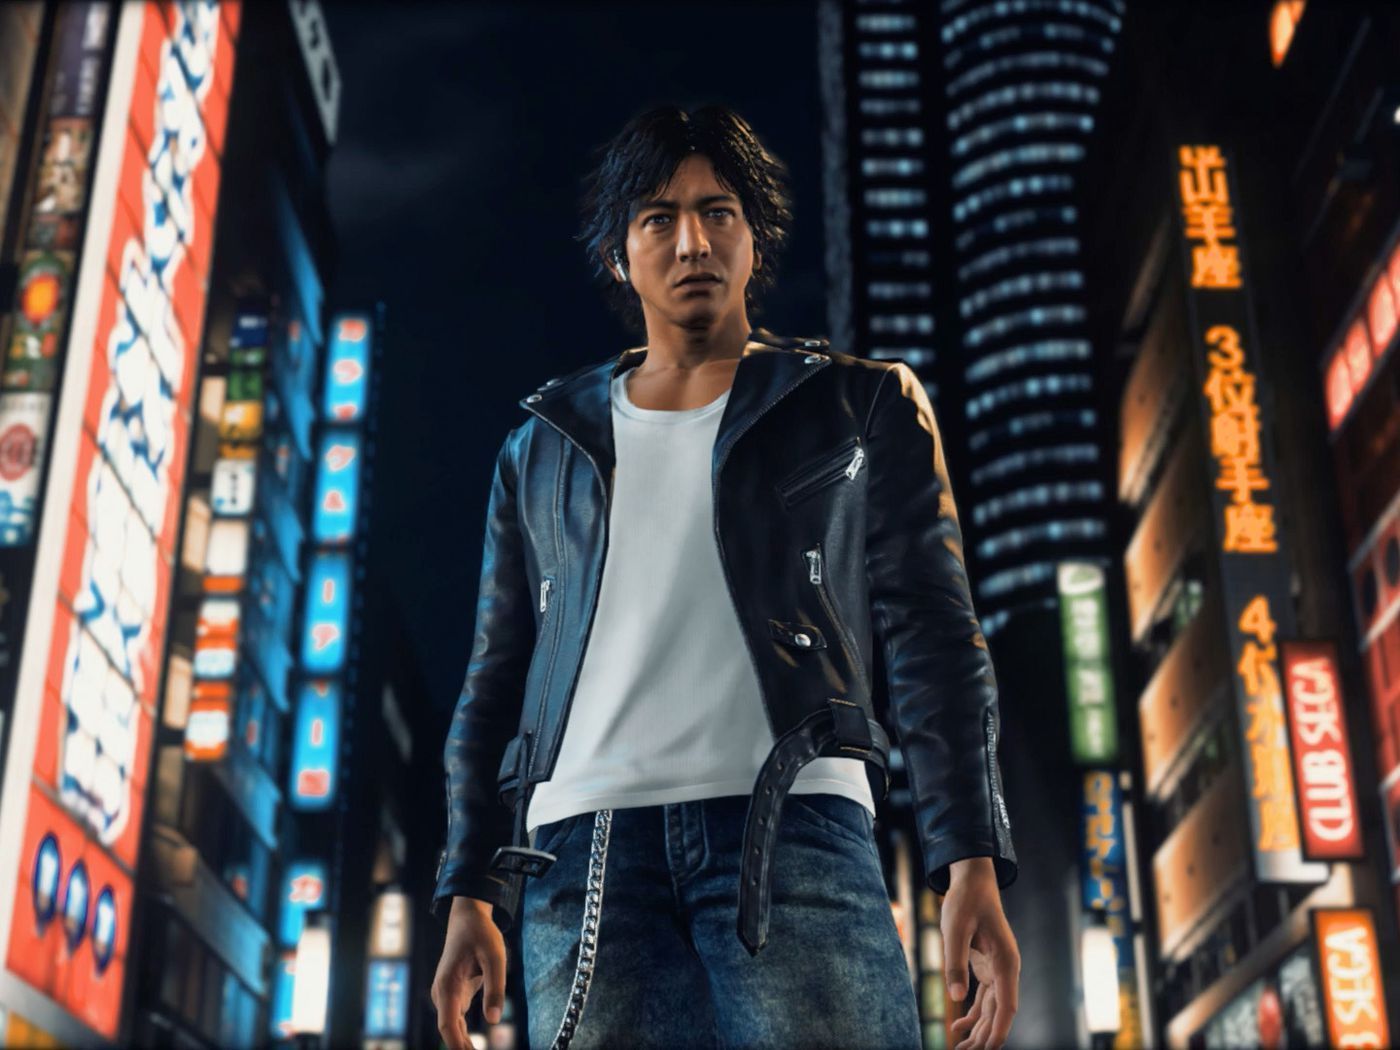 Judgment review: Same city, different eyes